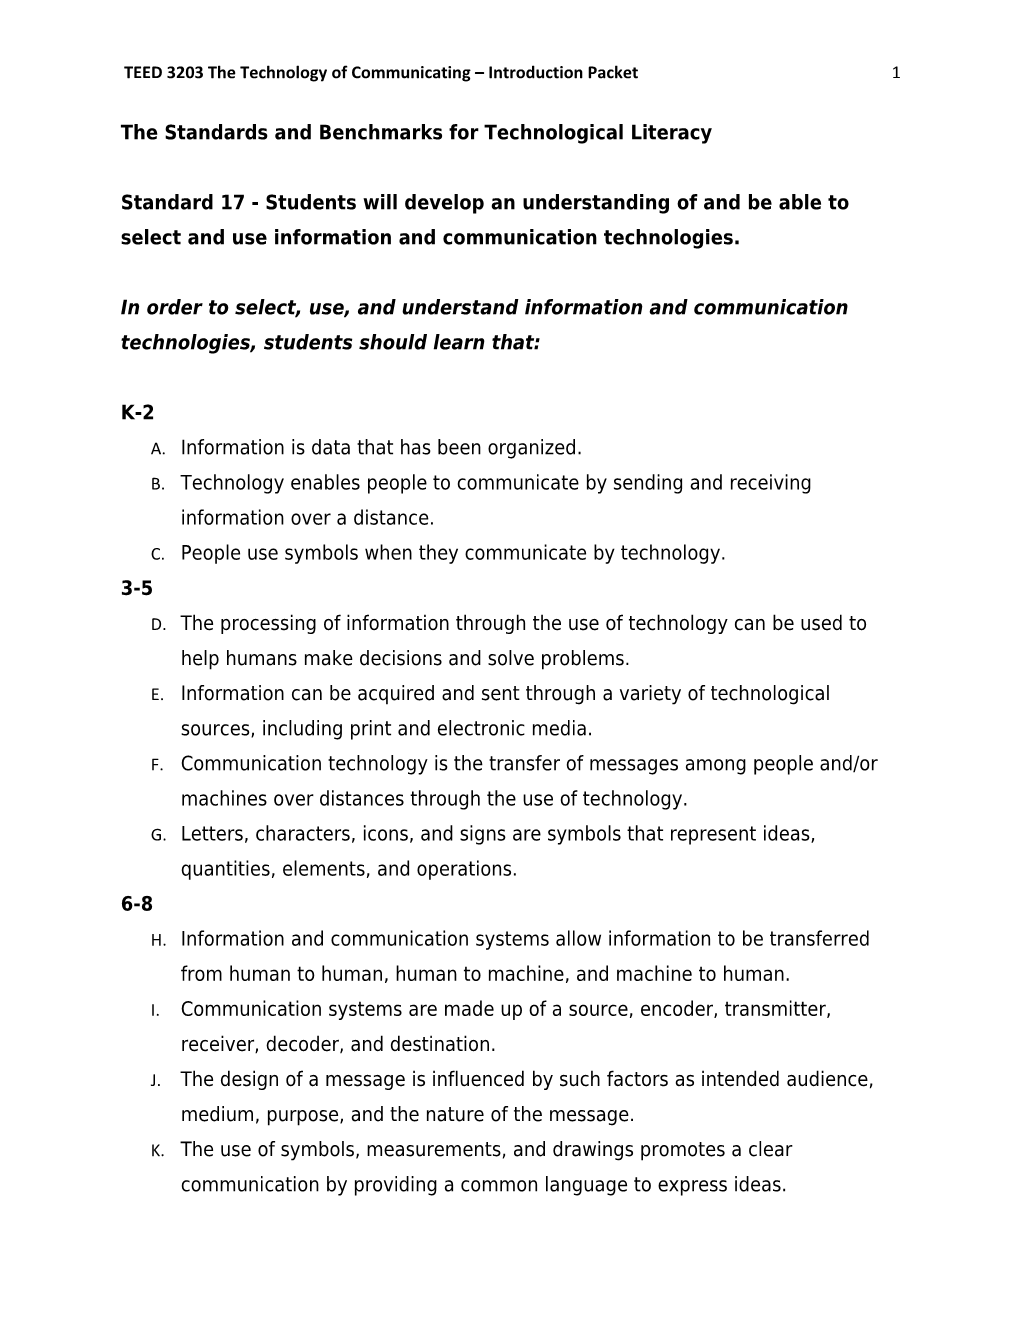 The Standards and Benchmarks for Technological Literacy